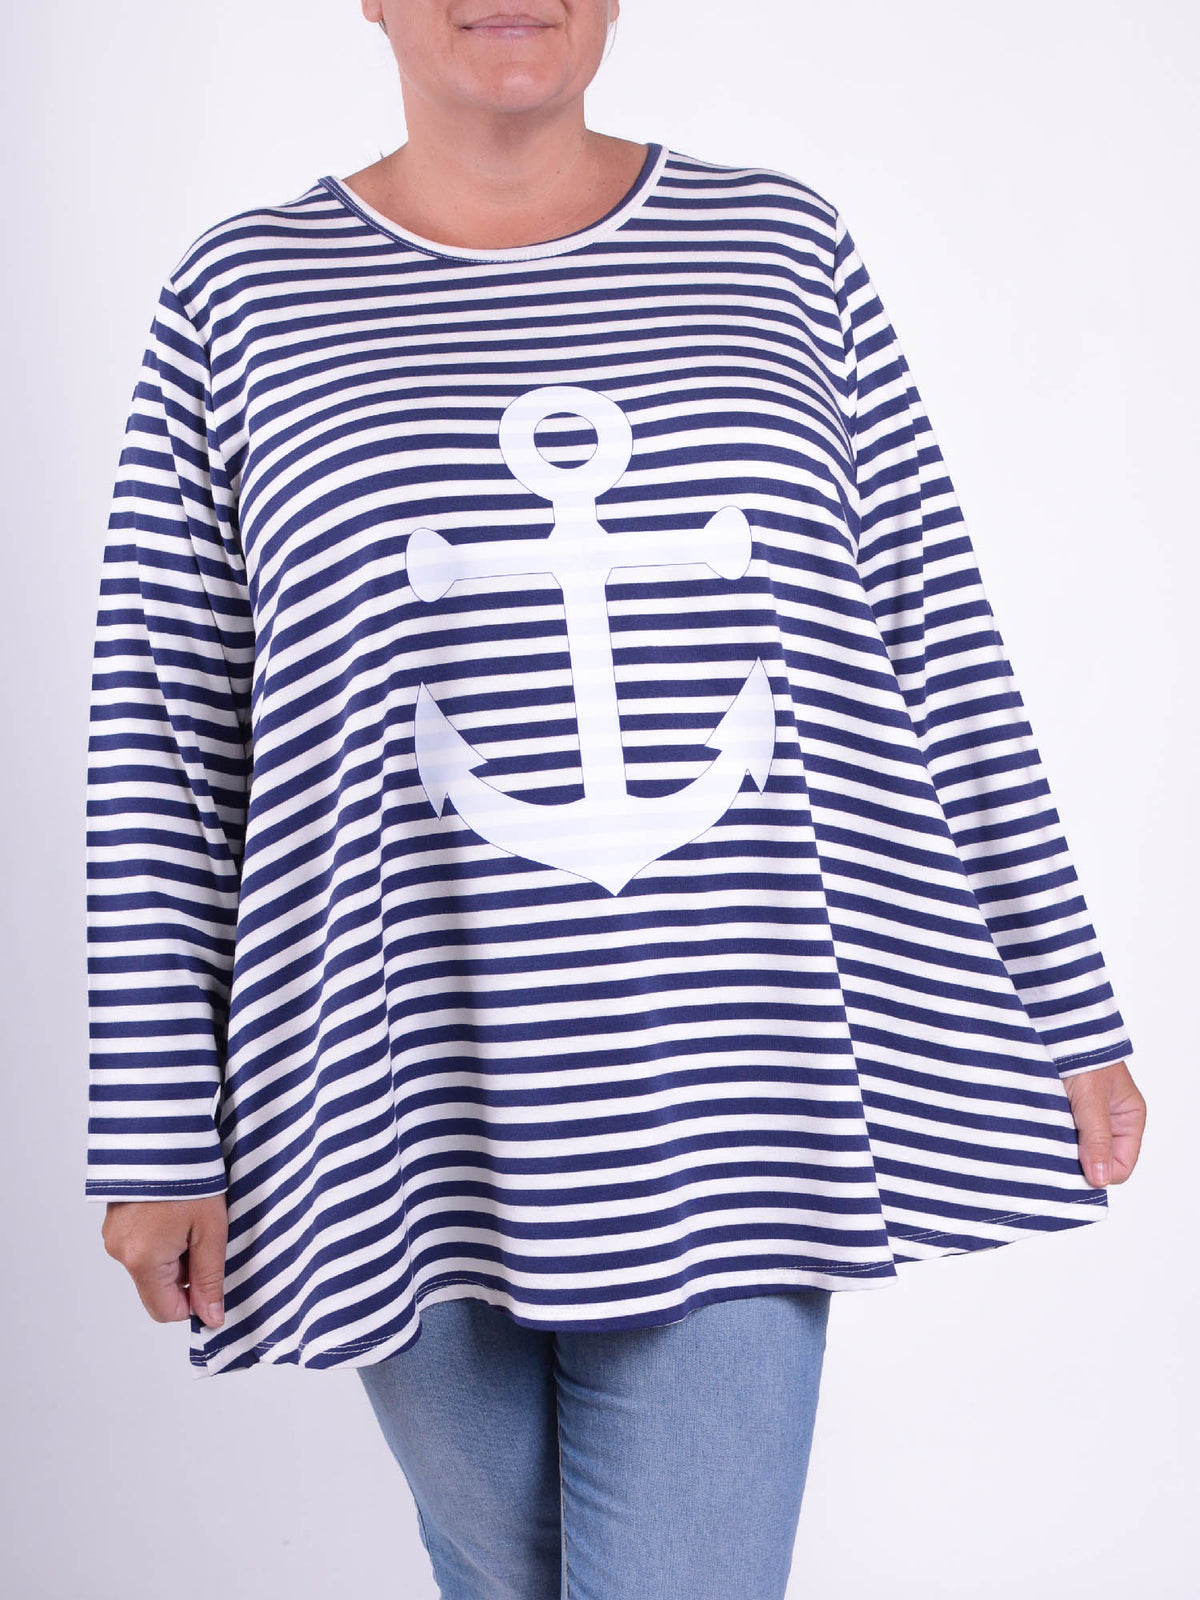 Striped Swing Top - 20516 STRIPE ANCHOR, , Pure Plus Clothing, Lagenlook Clothing, Plus Size Fashion, Over 50 Fashion